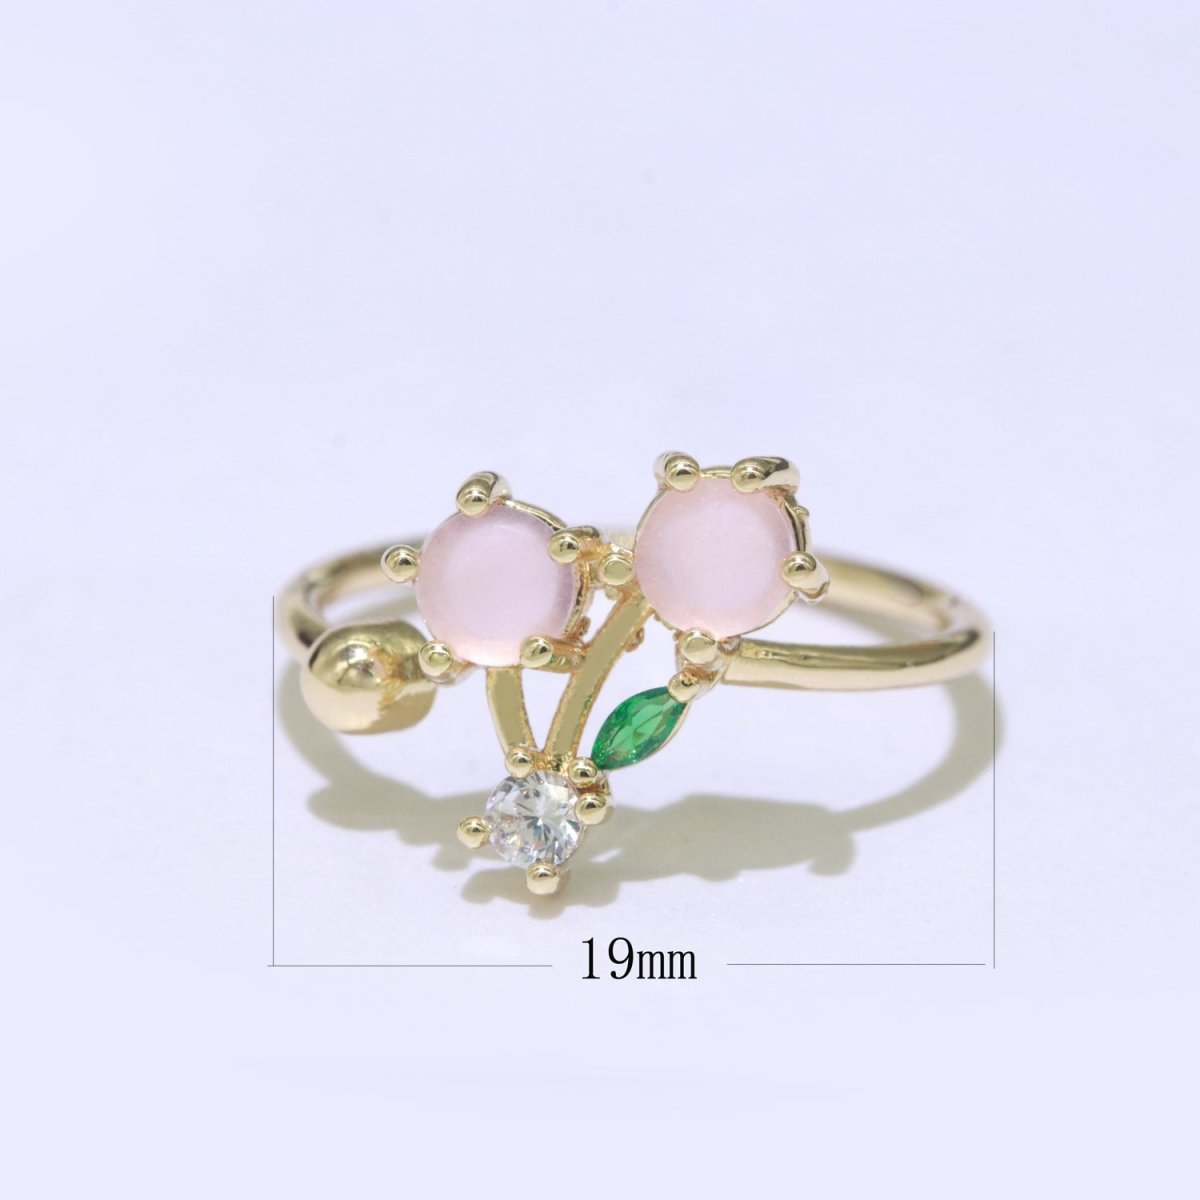 Dainty Fruit ring, Gold Mini Fruit Ring, Dainty Stackable Rings, Open Adjustable Ring Crystal Tropical Fruits, Pink Cherry Ring O-450 - DLUXCA